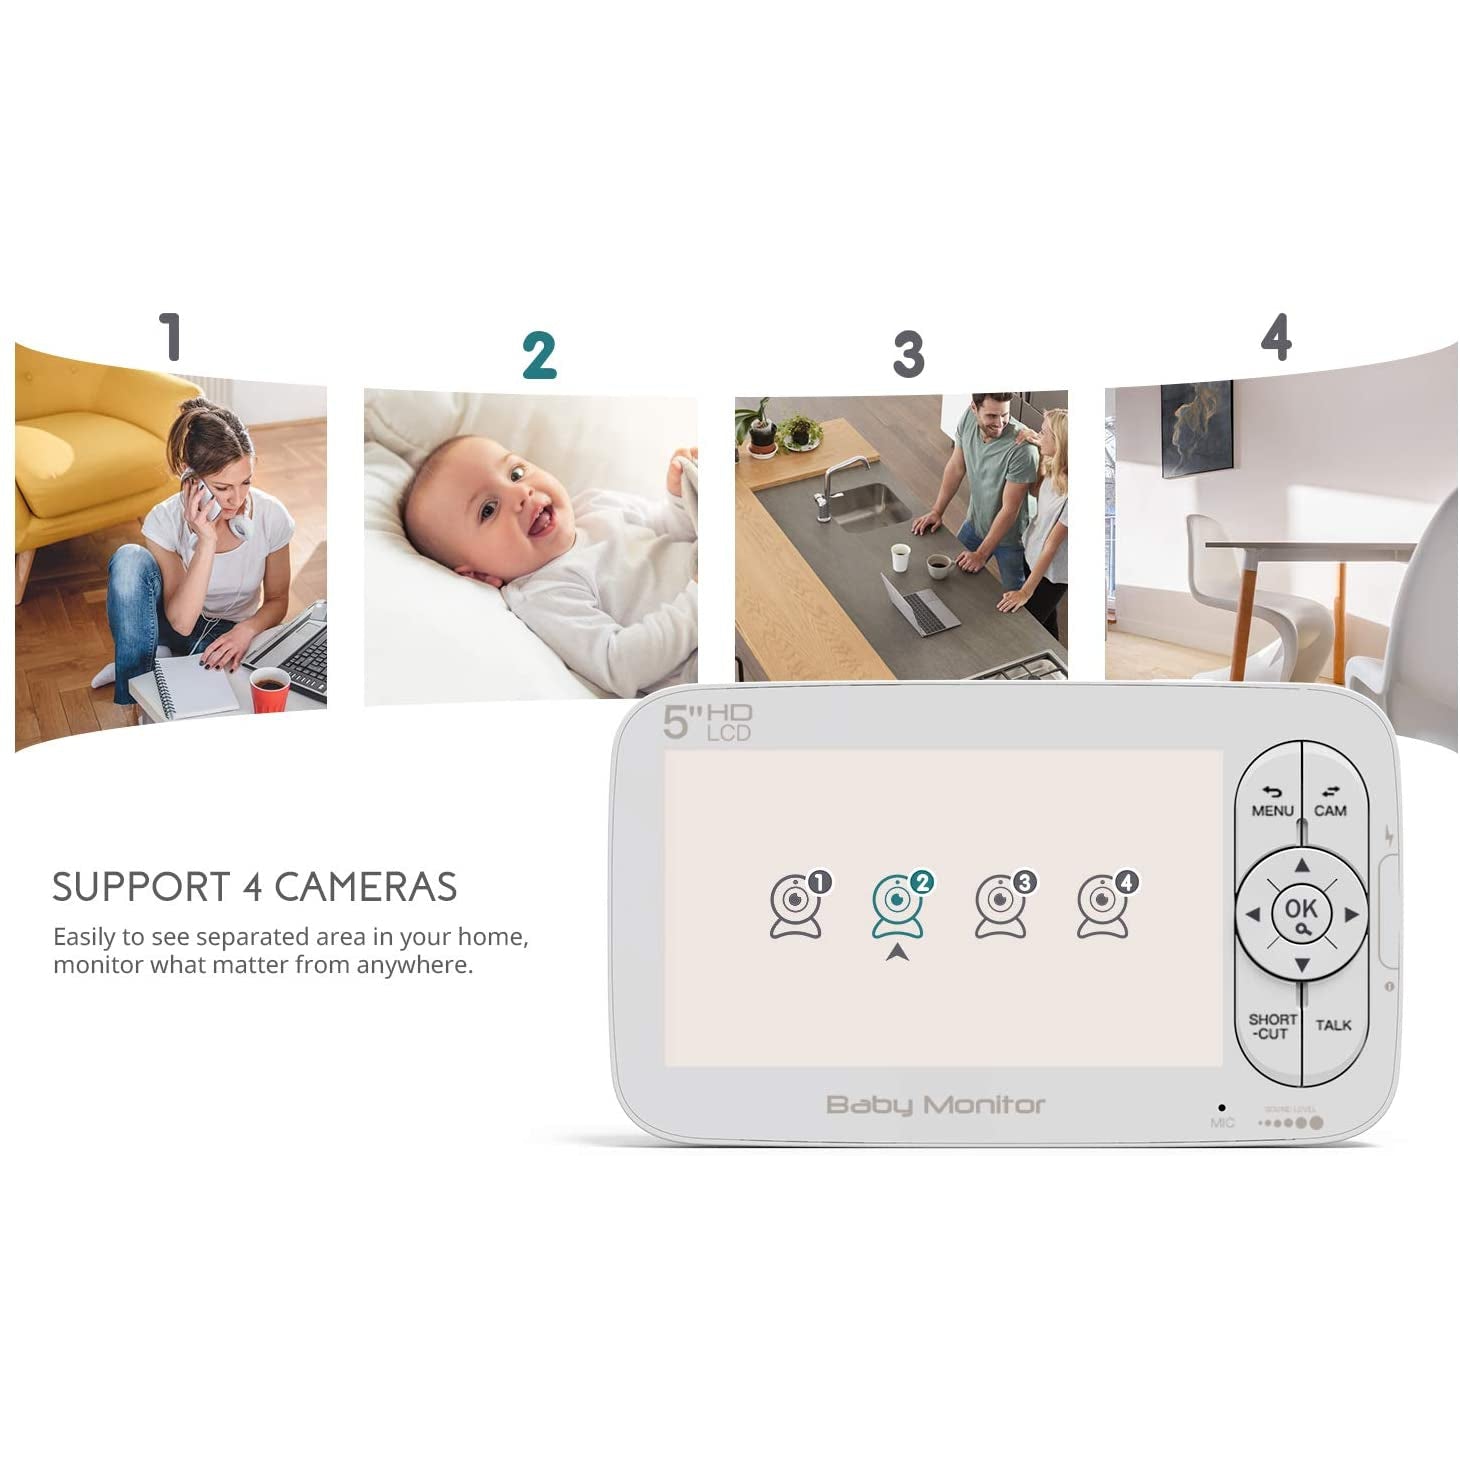 Cooau 5 inch Wireless Video Baby Monitor with Camera